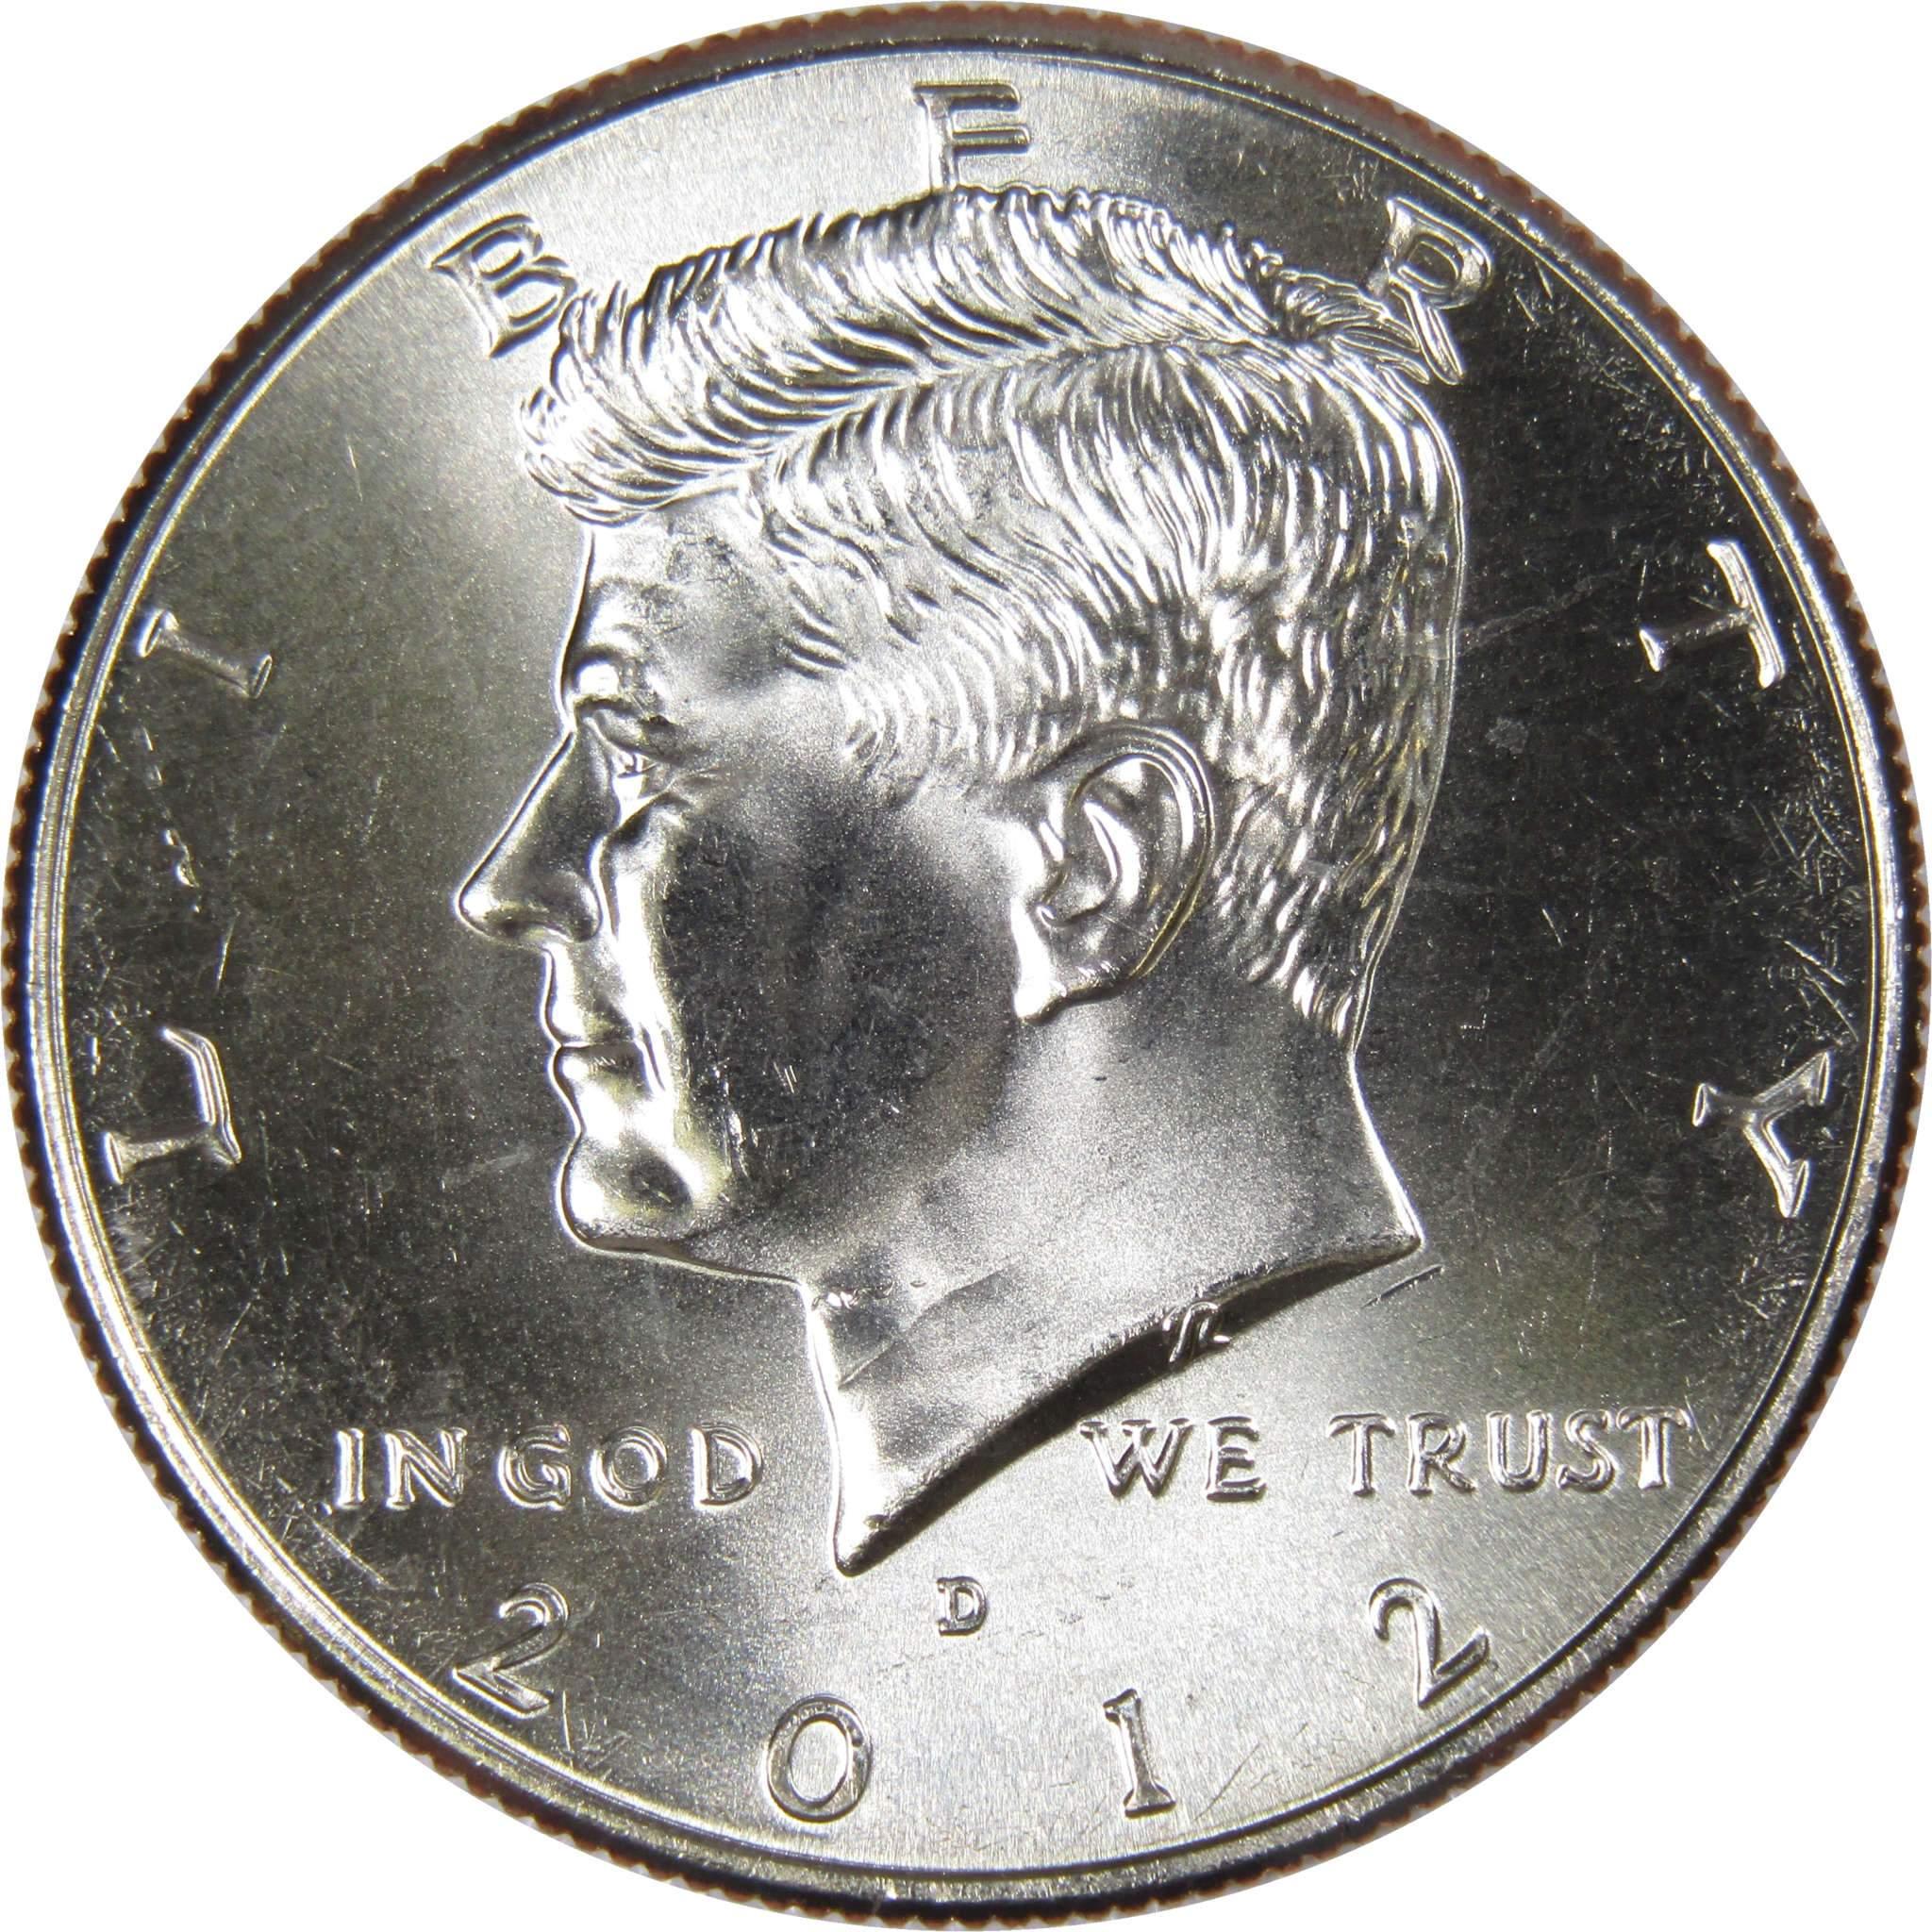 2012 D Kennedy Half Dollar BU Uncirculated Mint State 50c US Coin Collectible